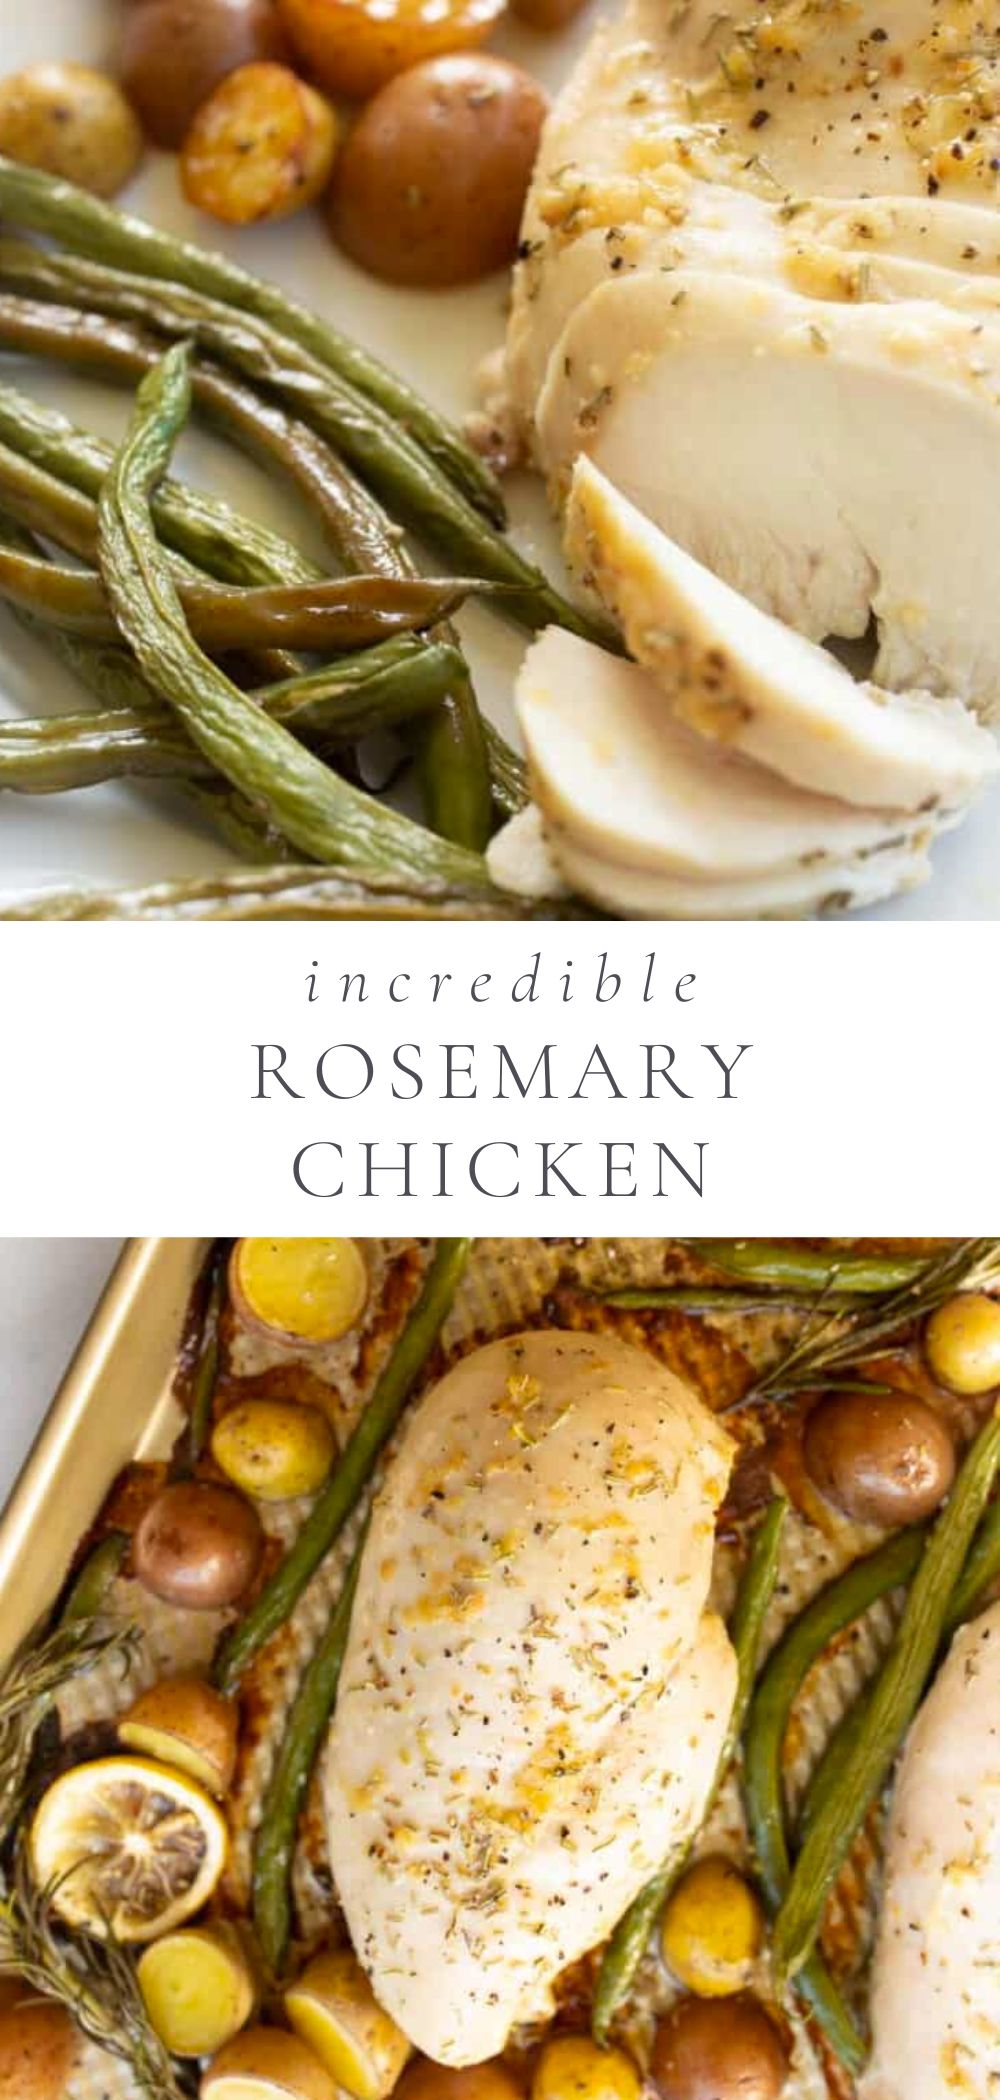 Two photos where one has a white plate and the other has a Gold sheetpan filled with baked chicken and veggies such as green beans, baby potatoes and lemon slices.